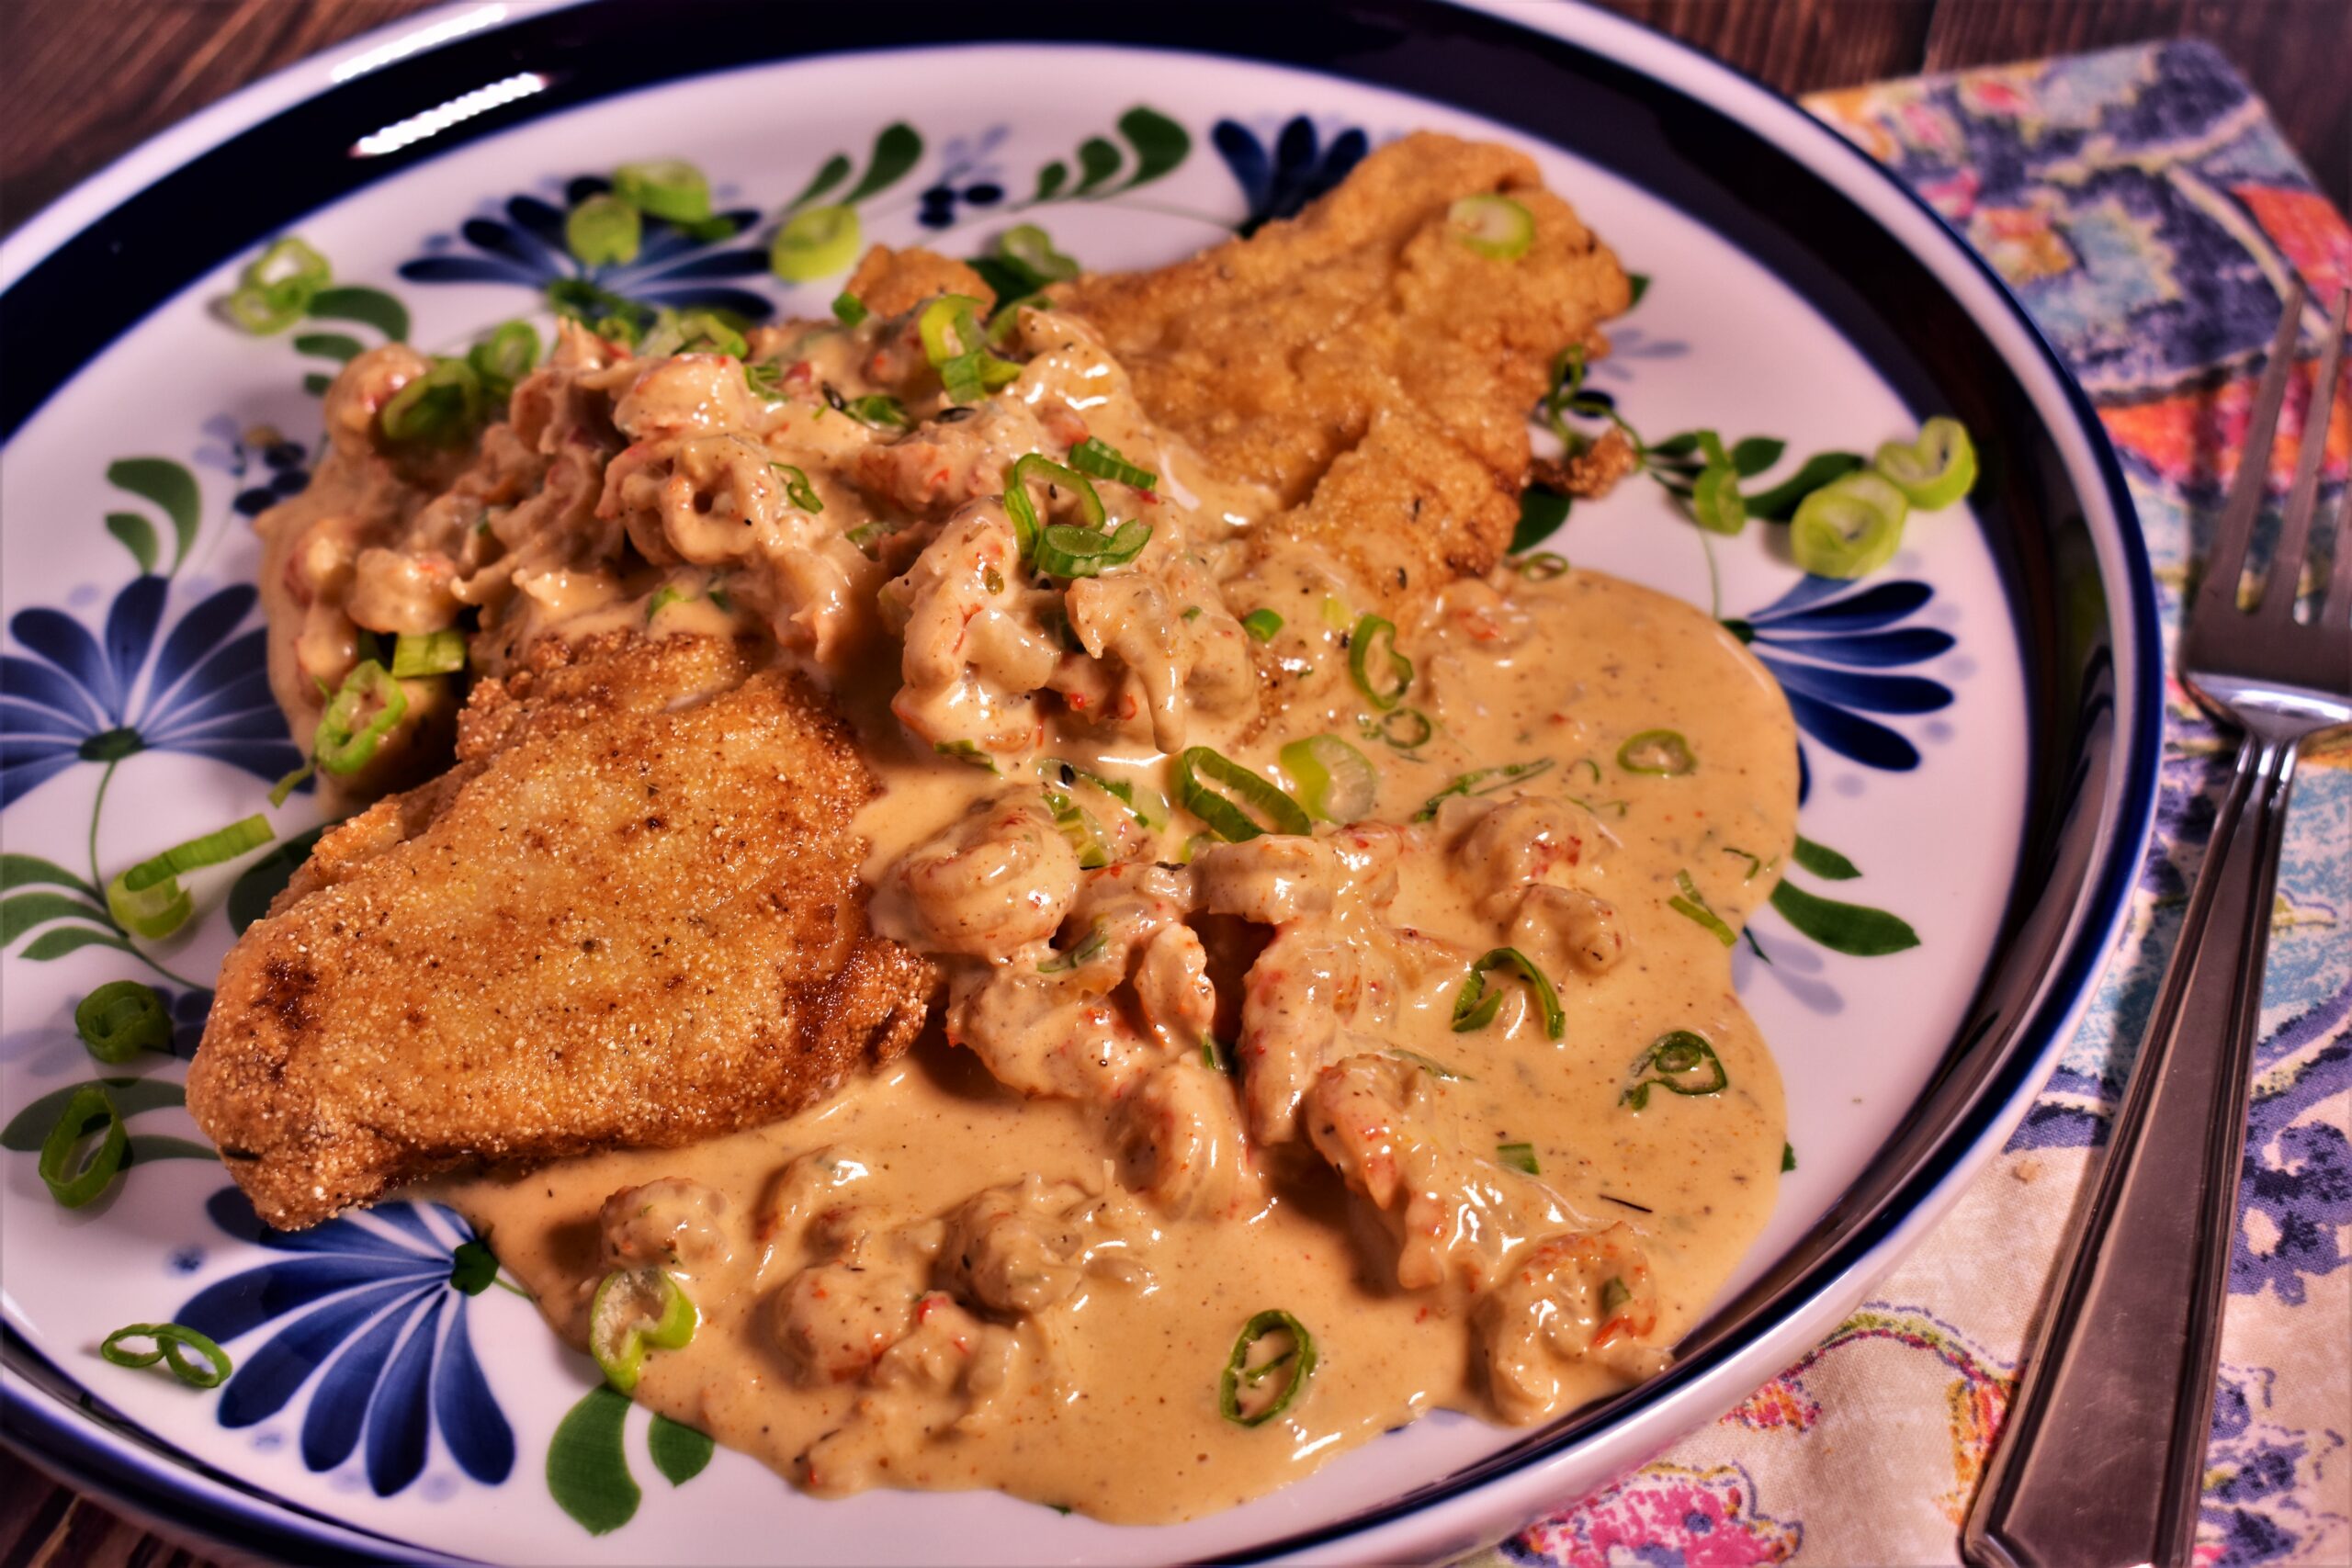 a plate of pan fried fish with creamy seafood sauce dribbled on it